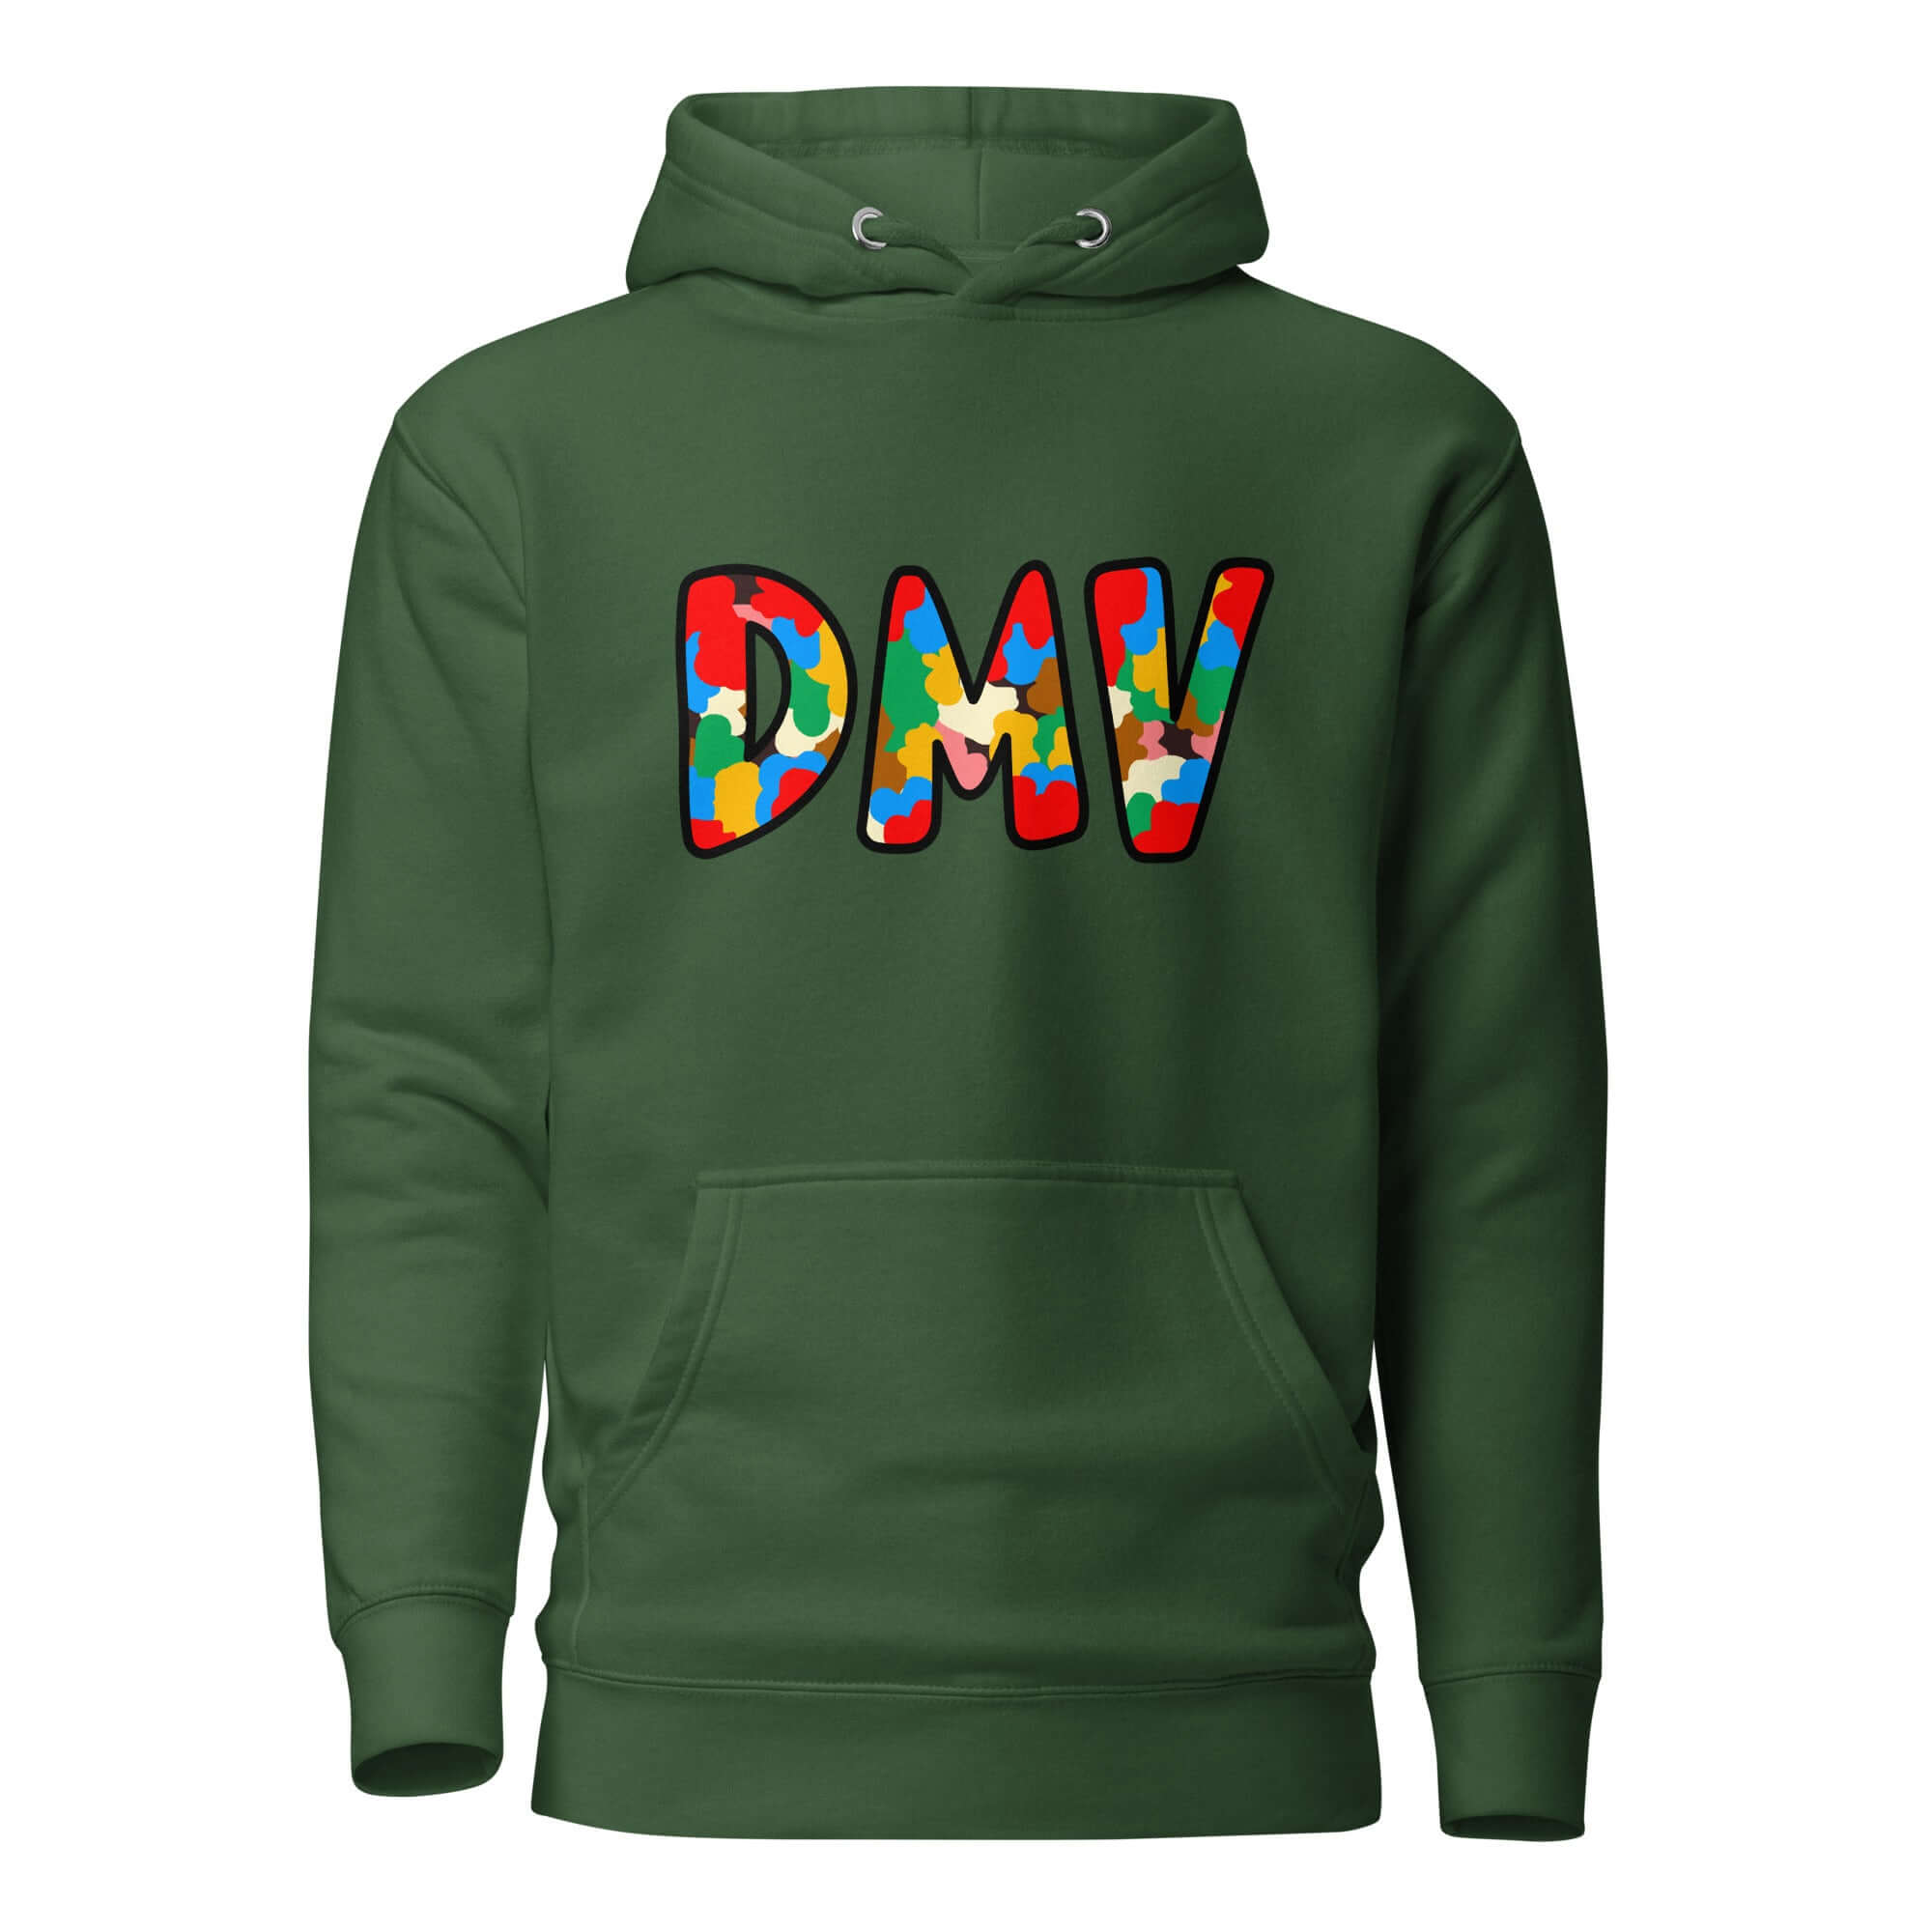 The City Collection DMV Unisex Hoodie